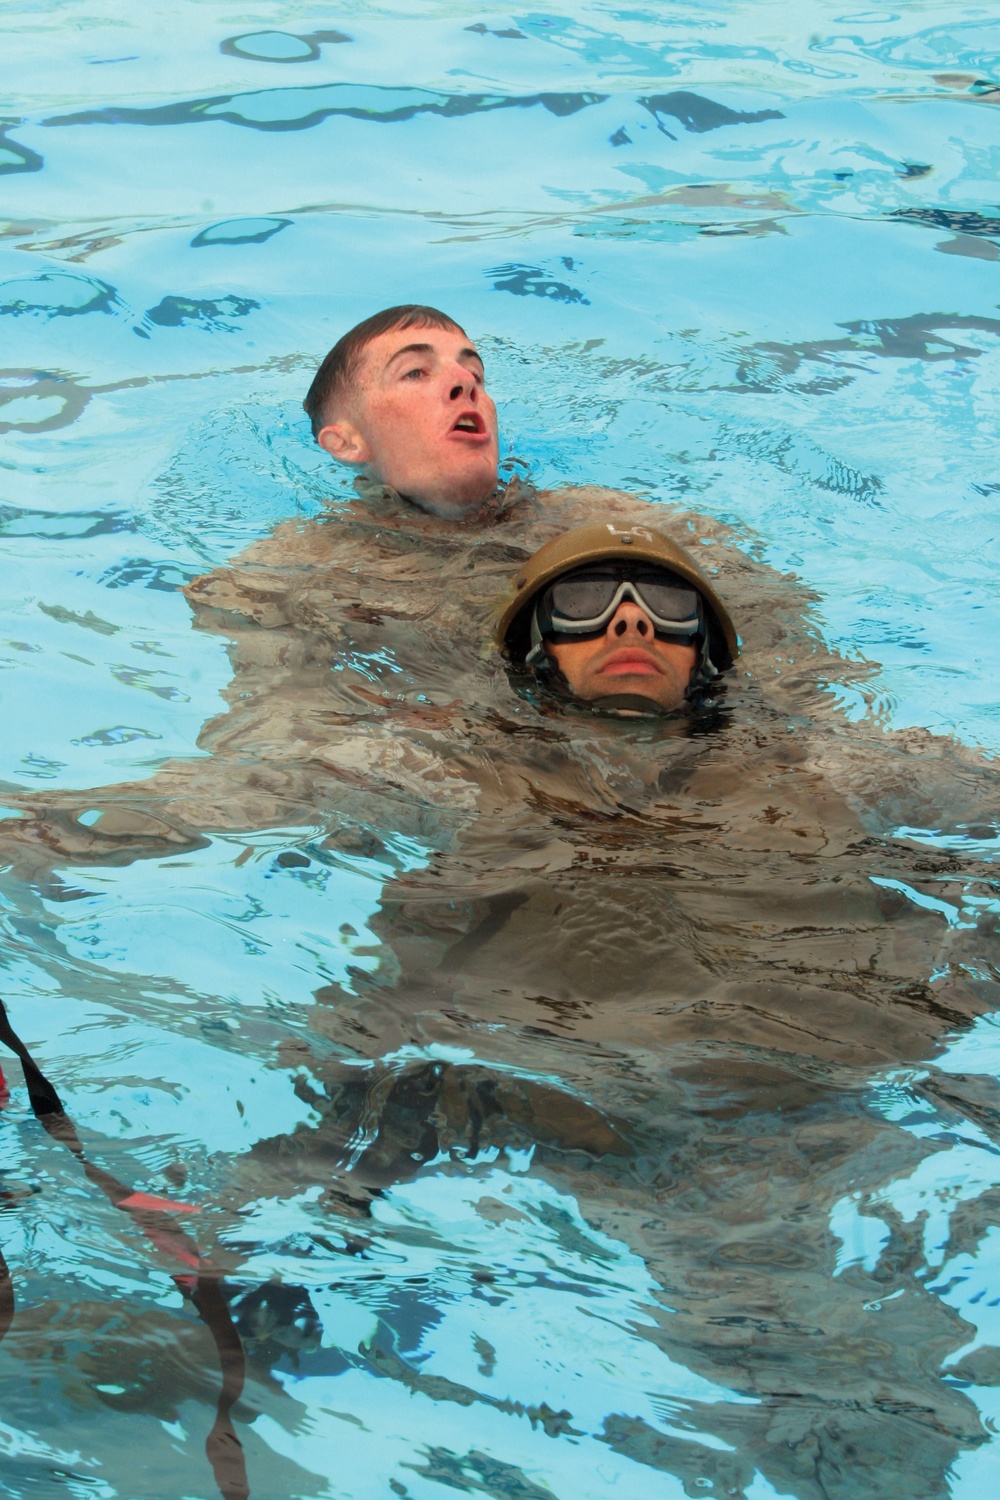 DVIDS - News - Marines swim through challenging water-rescue course